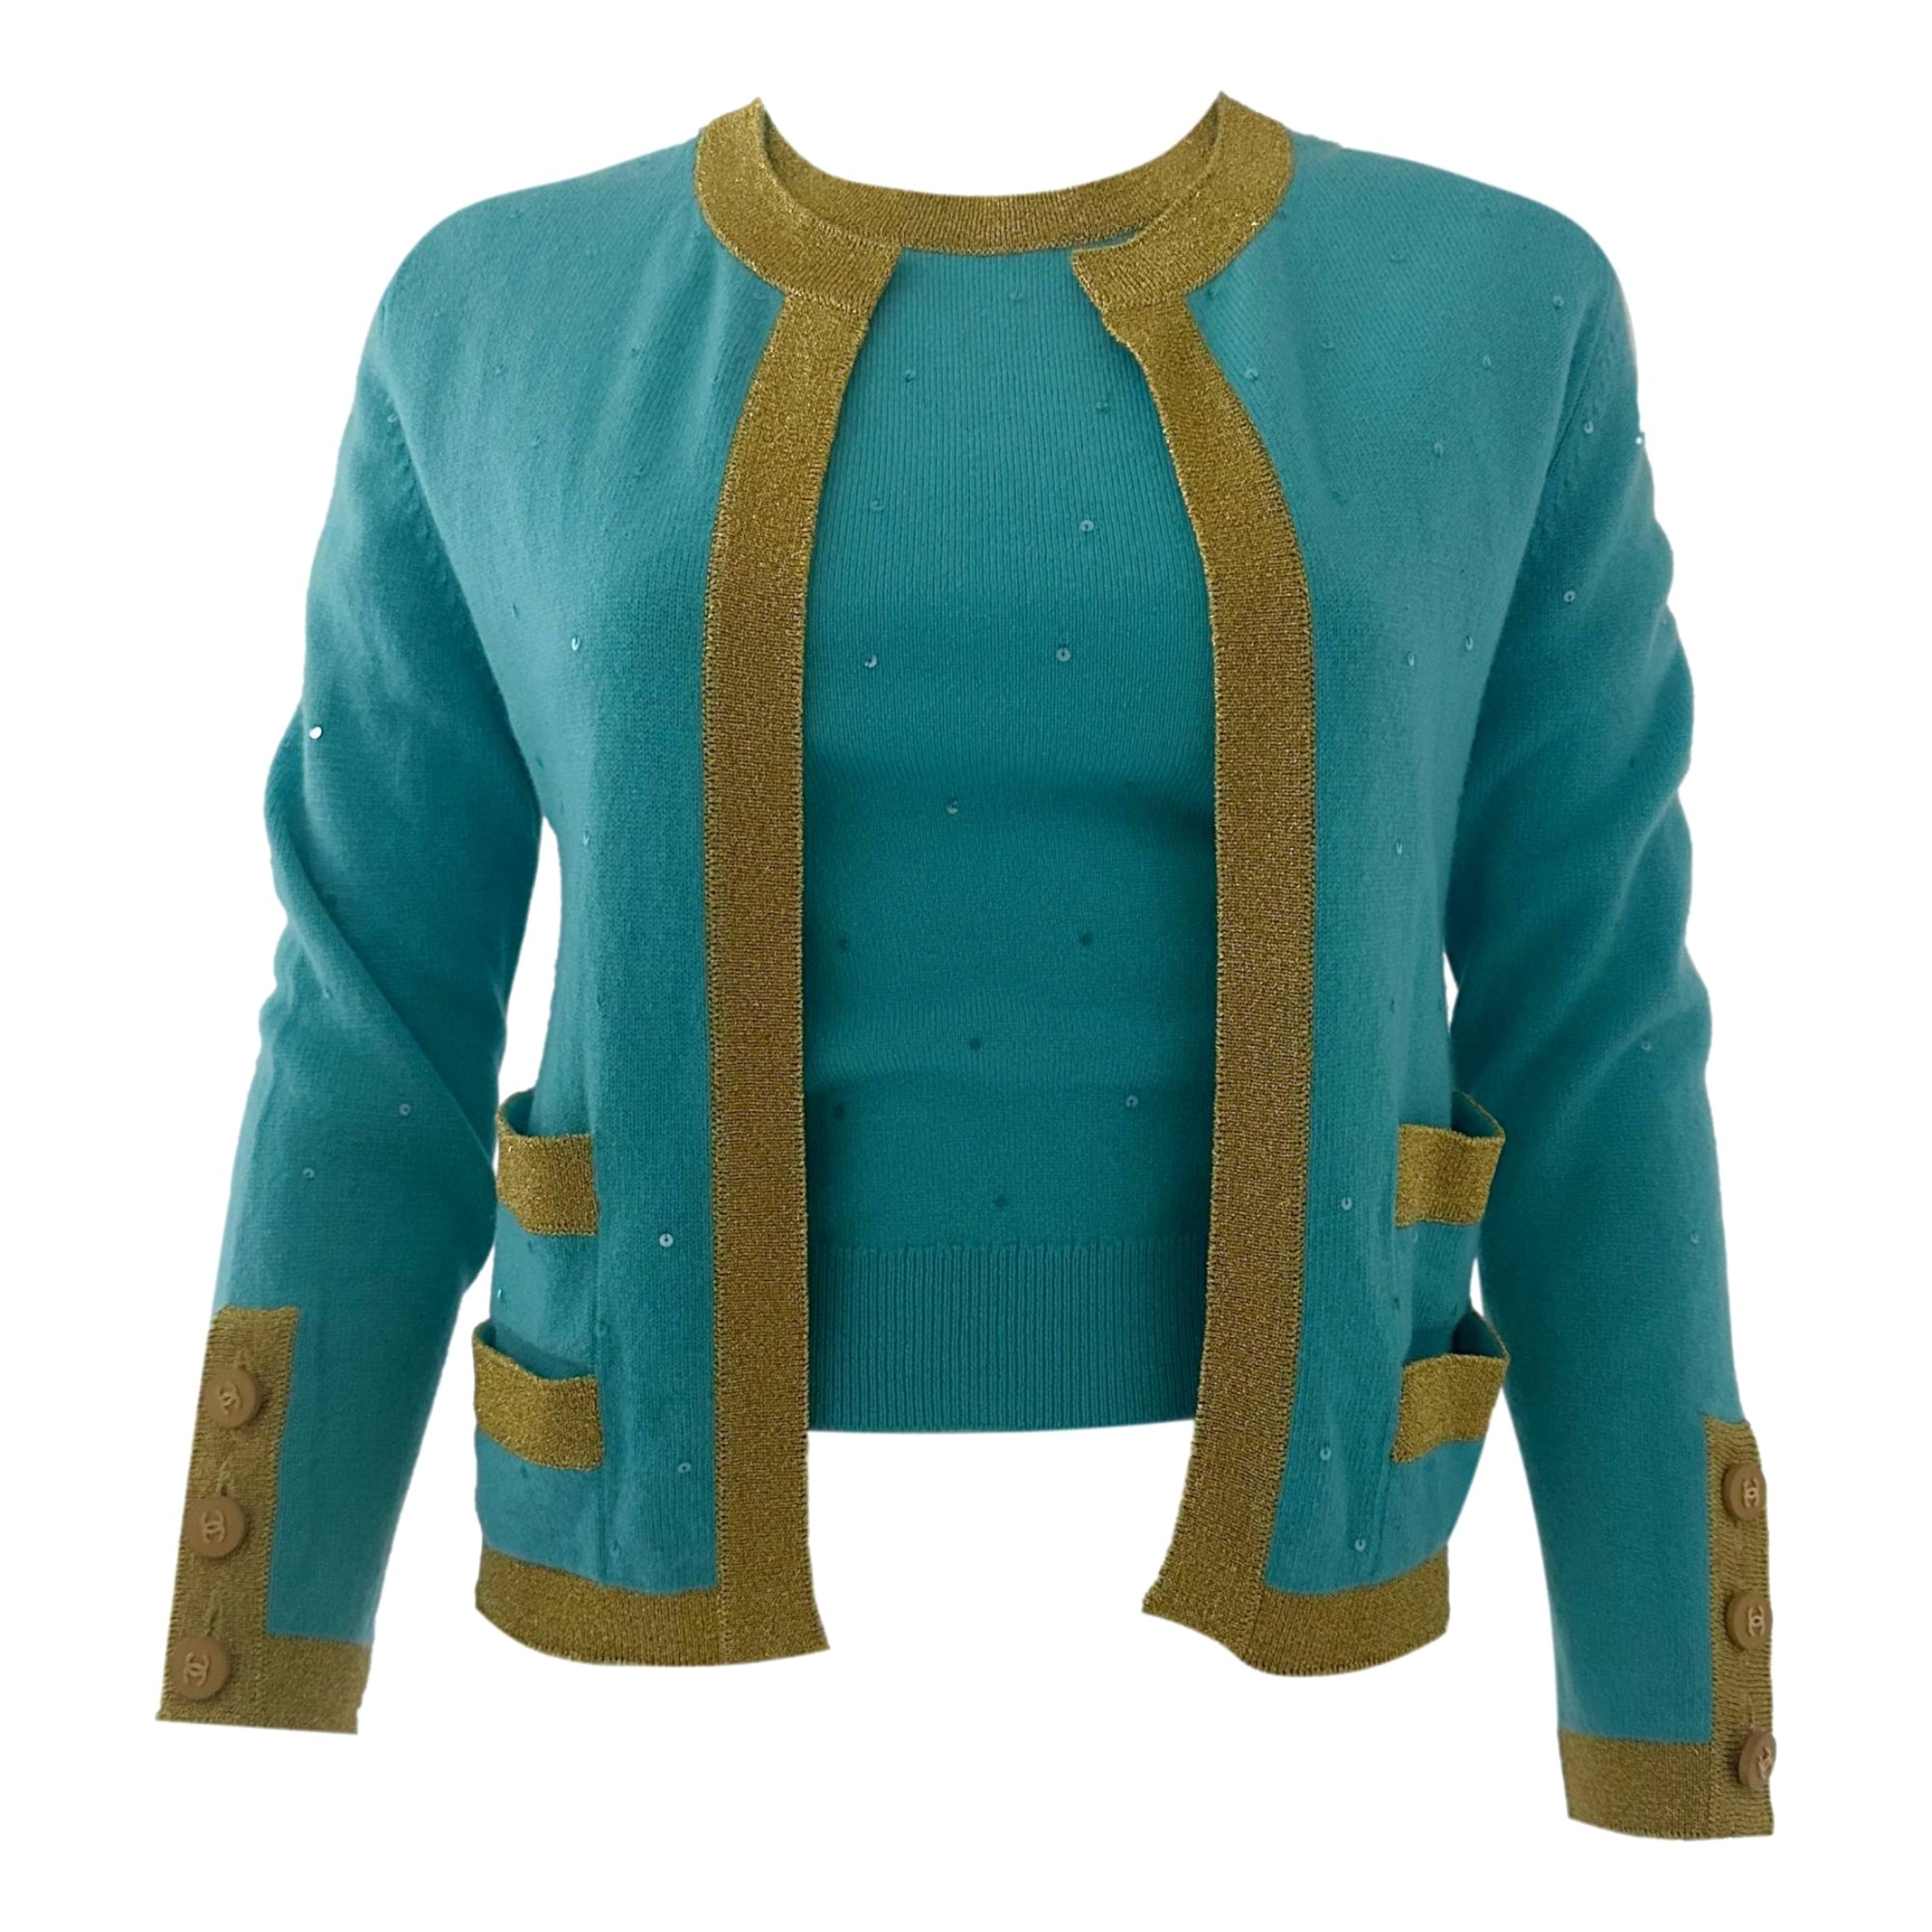 Chanel Turquoise Sequin Sweater Set